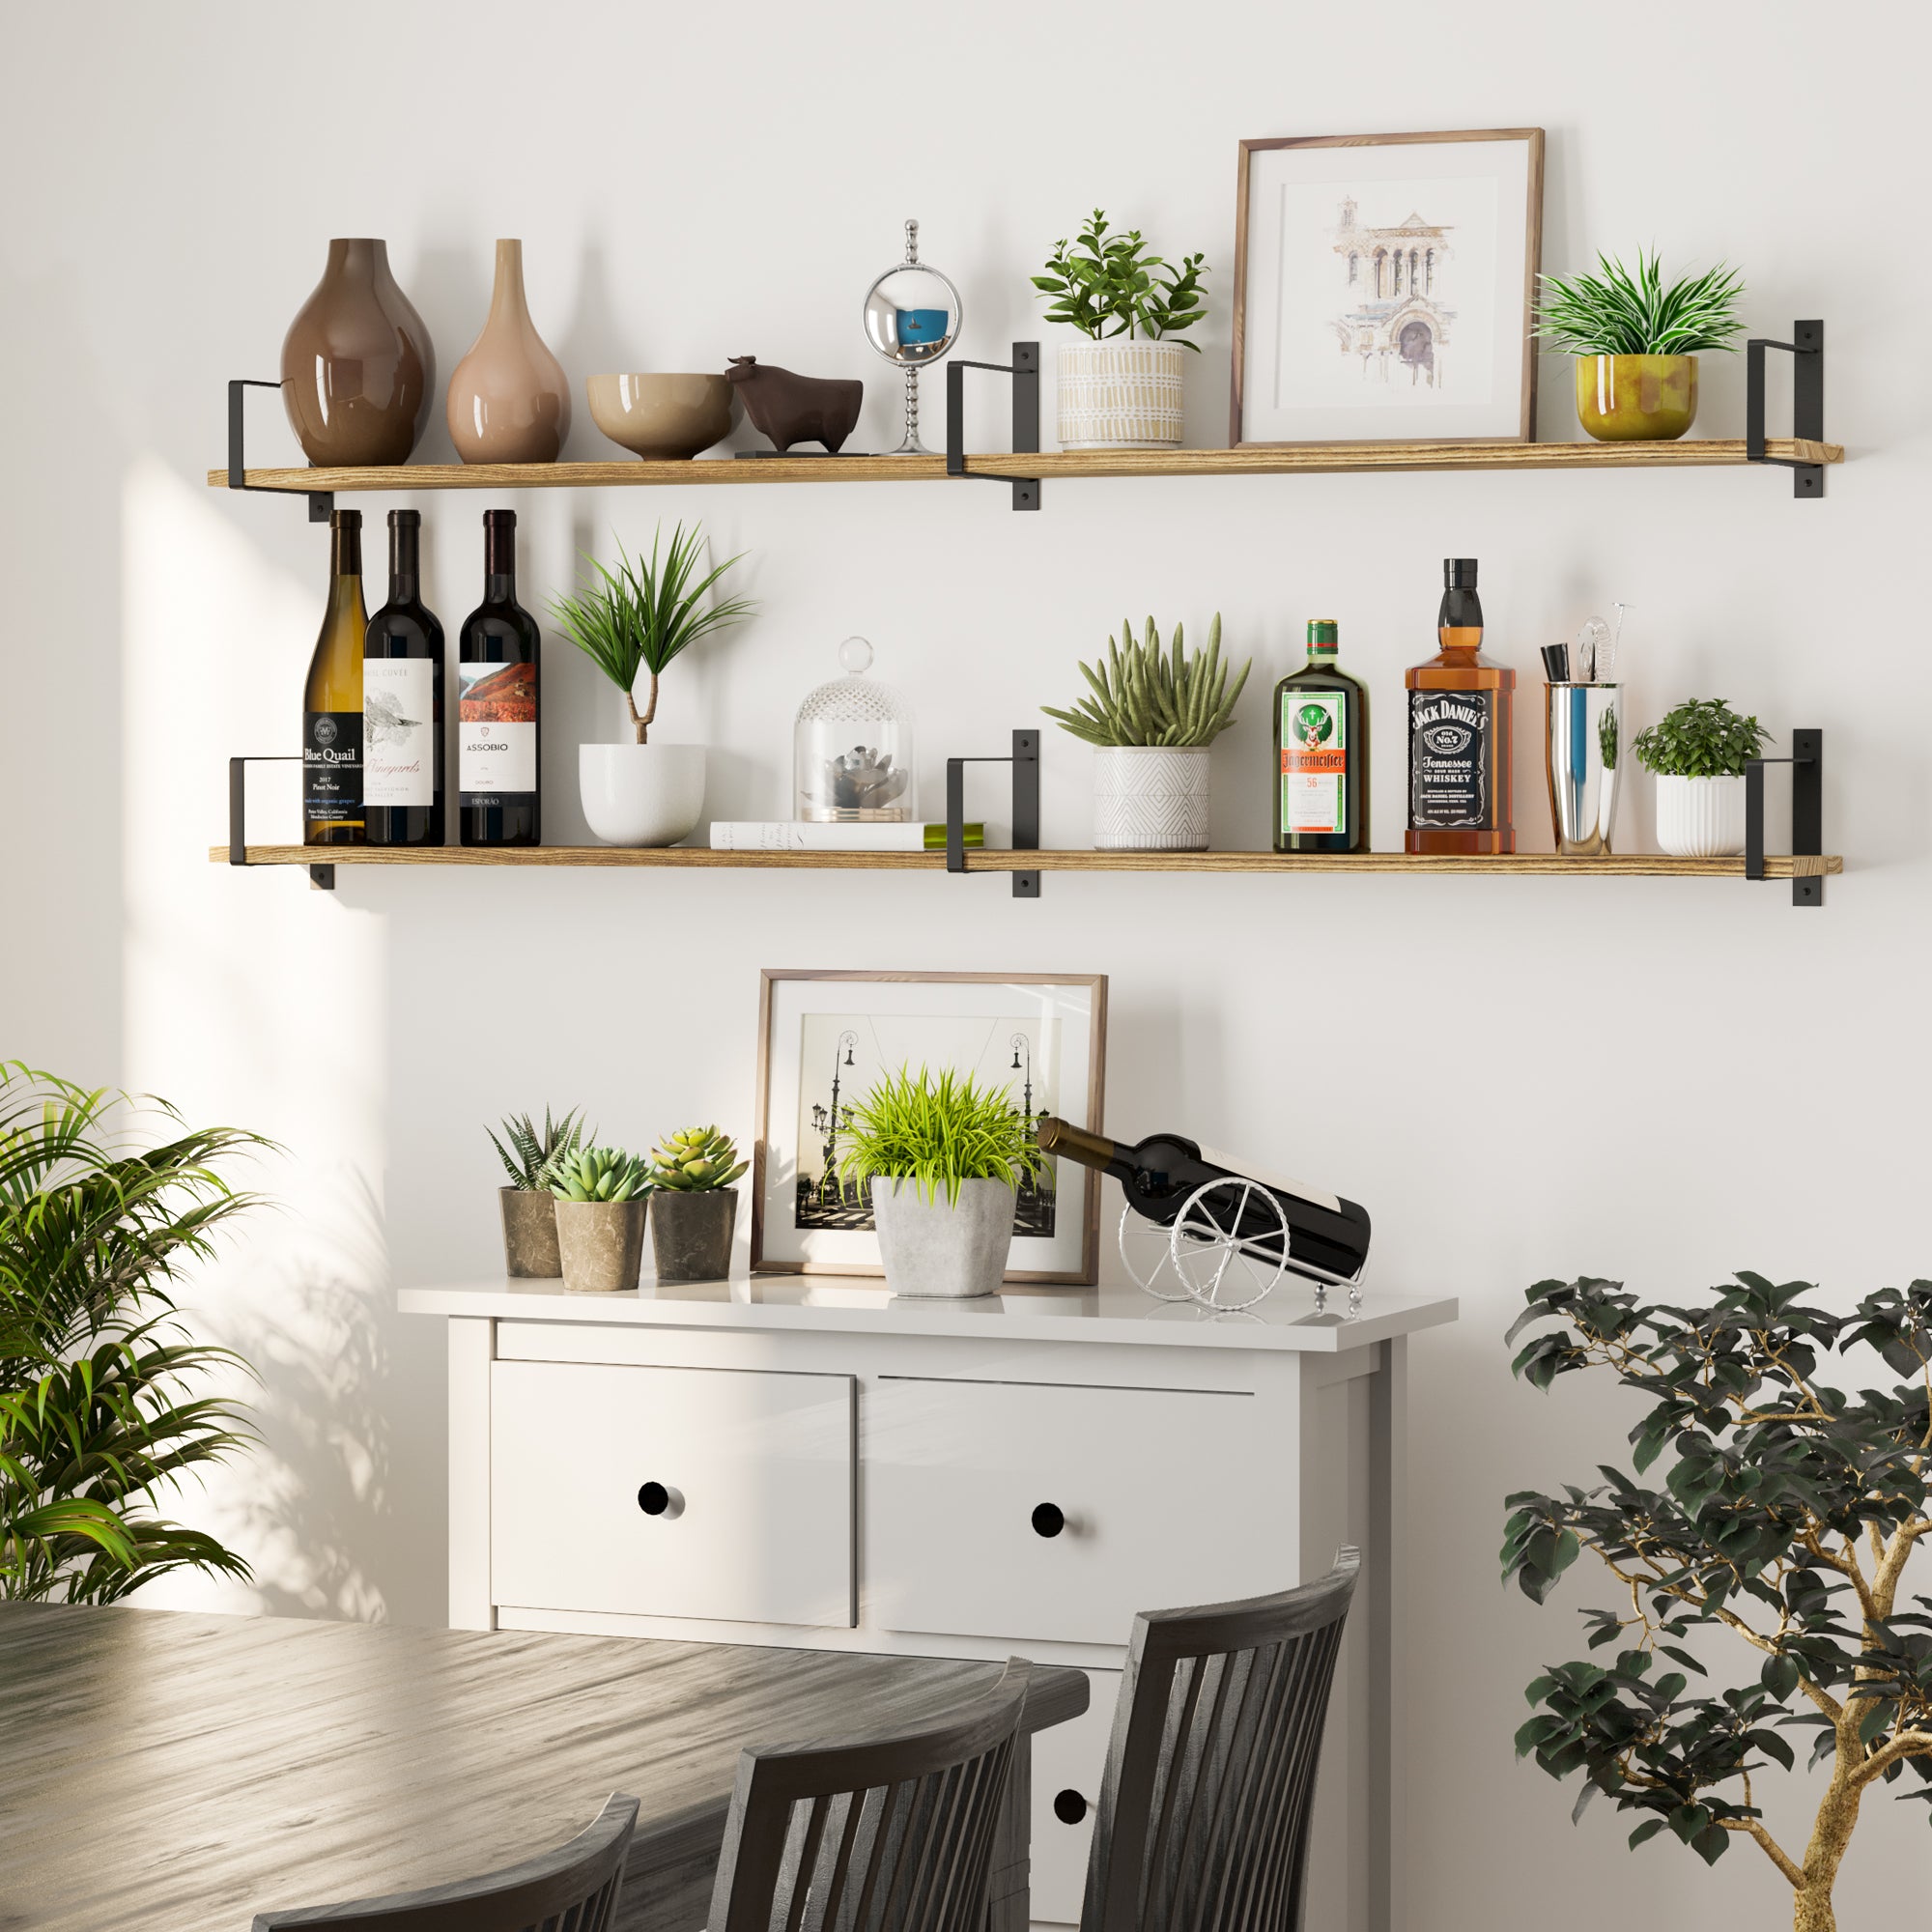 Dining area with organizer shelves burnt color decorated with vases, bottles, and plants above a white sideboard.